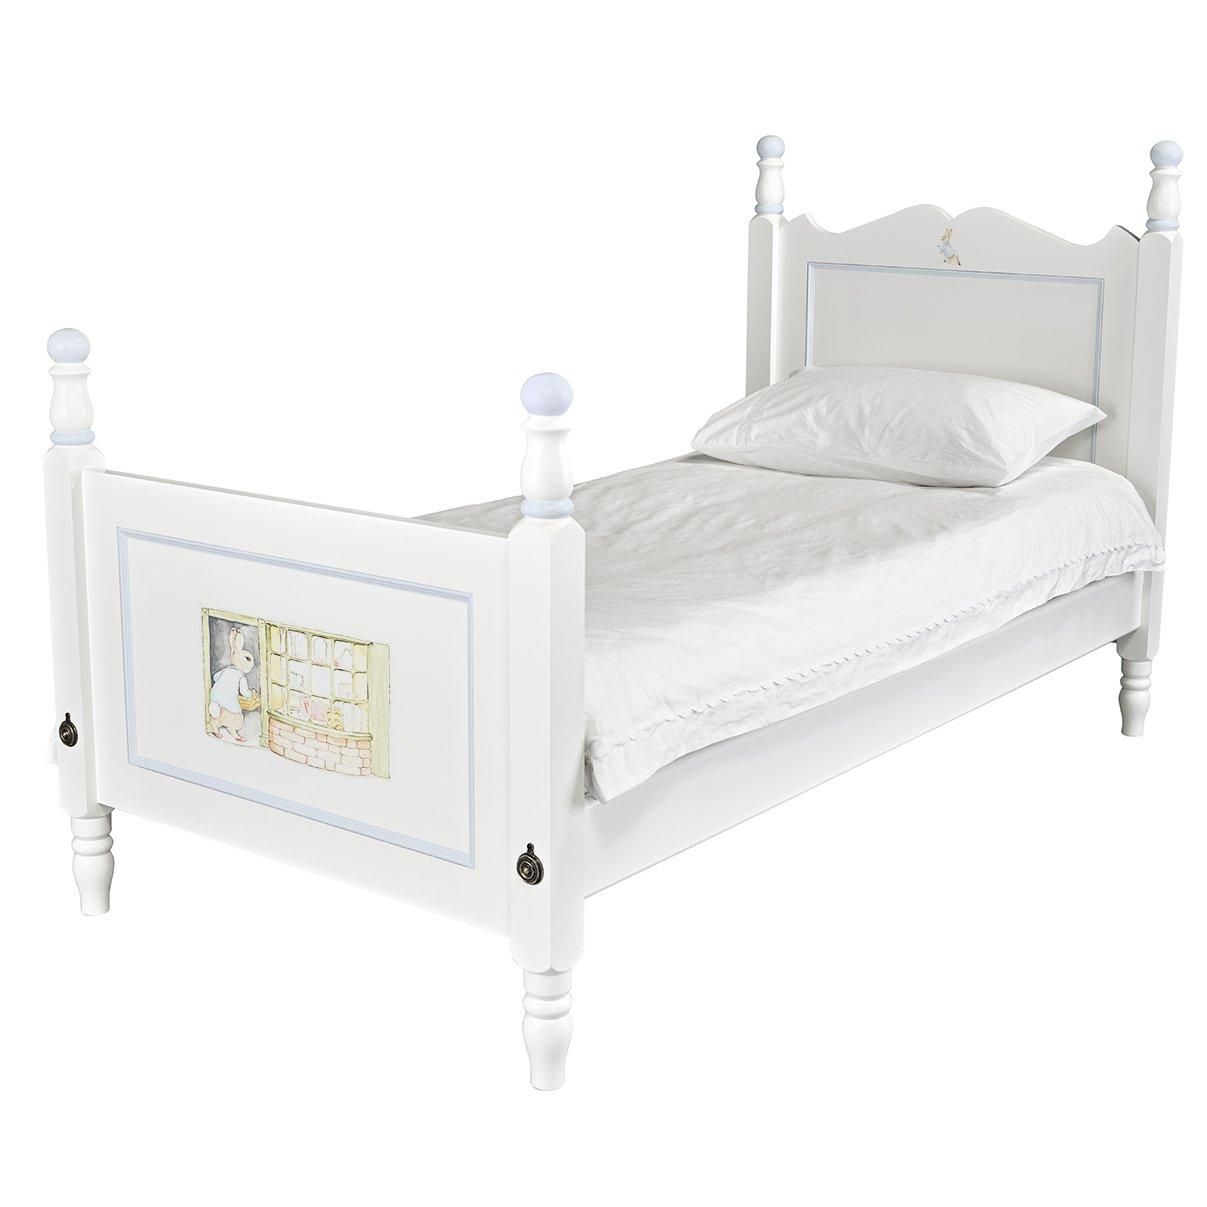 Single William Bed - Beatrix Potter with Blissful Blue Trim